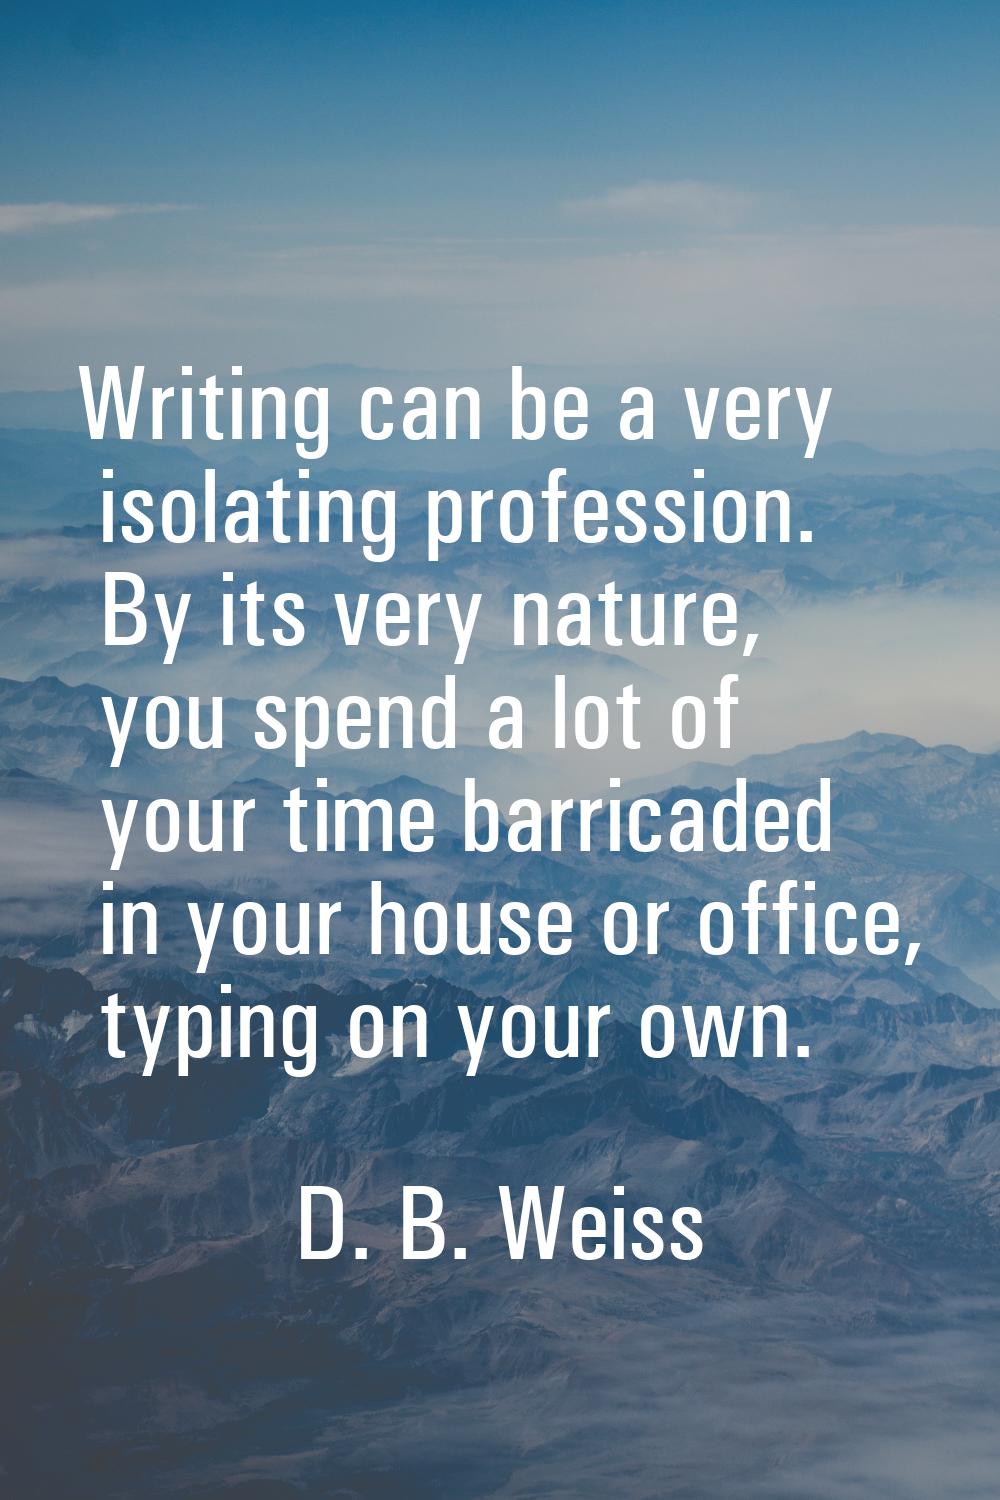 Writing can be a very isolating profession. By its very nature, you spend a lot of your time barric